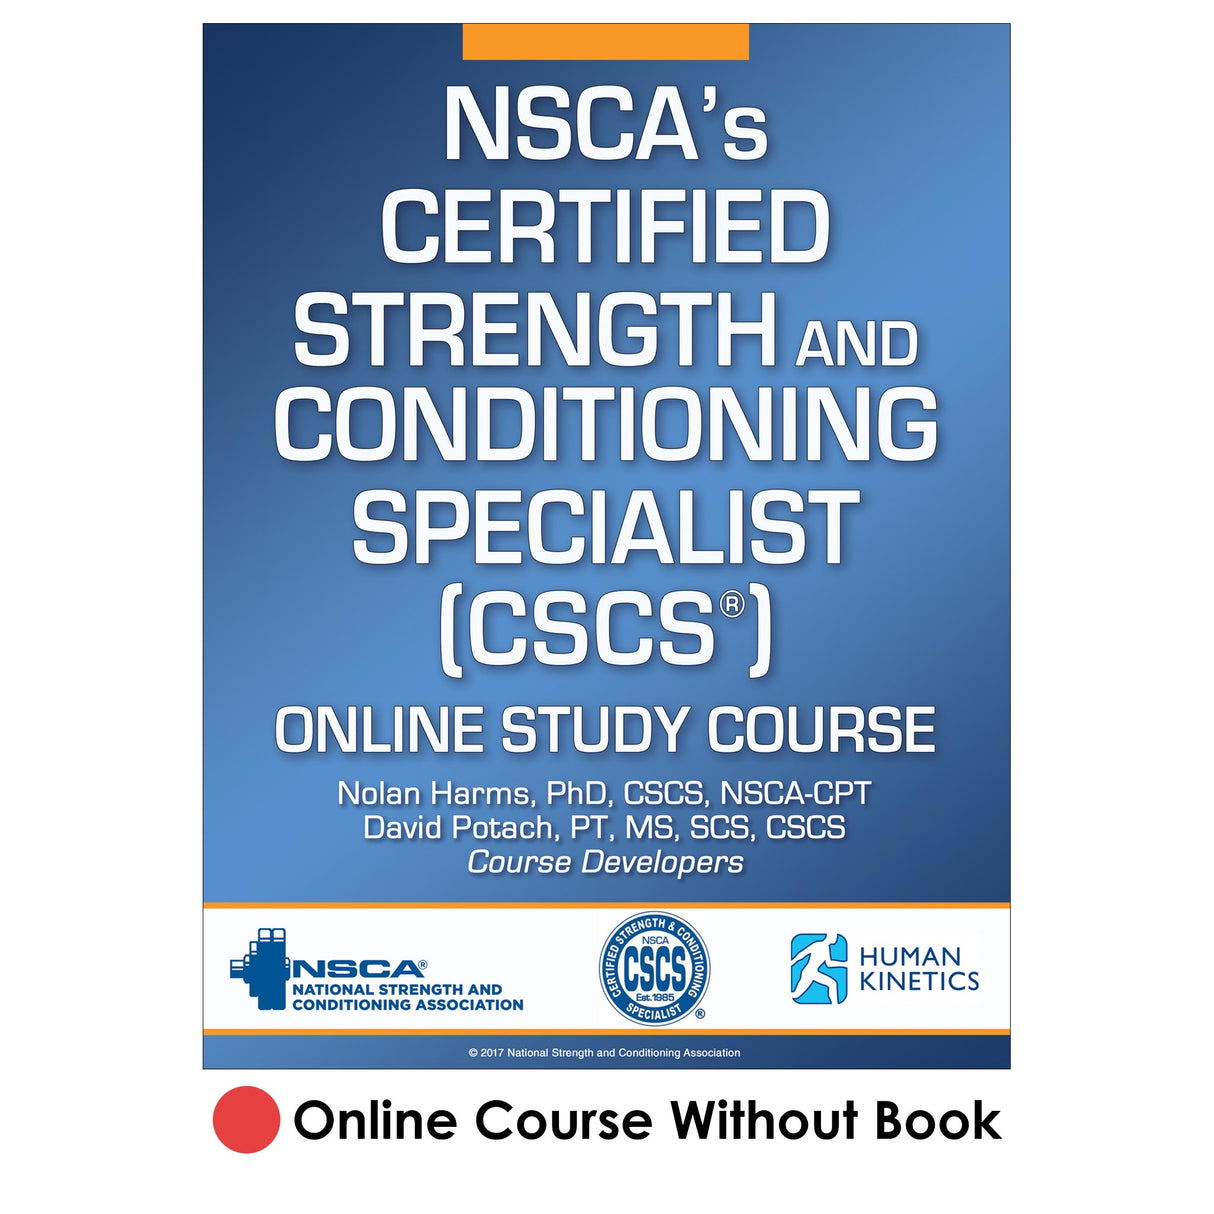 NSCA's Certified Strength and Conditioning Specialist (CSCS) 4th Edition Online Study/CE Course Without Book